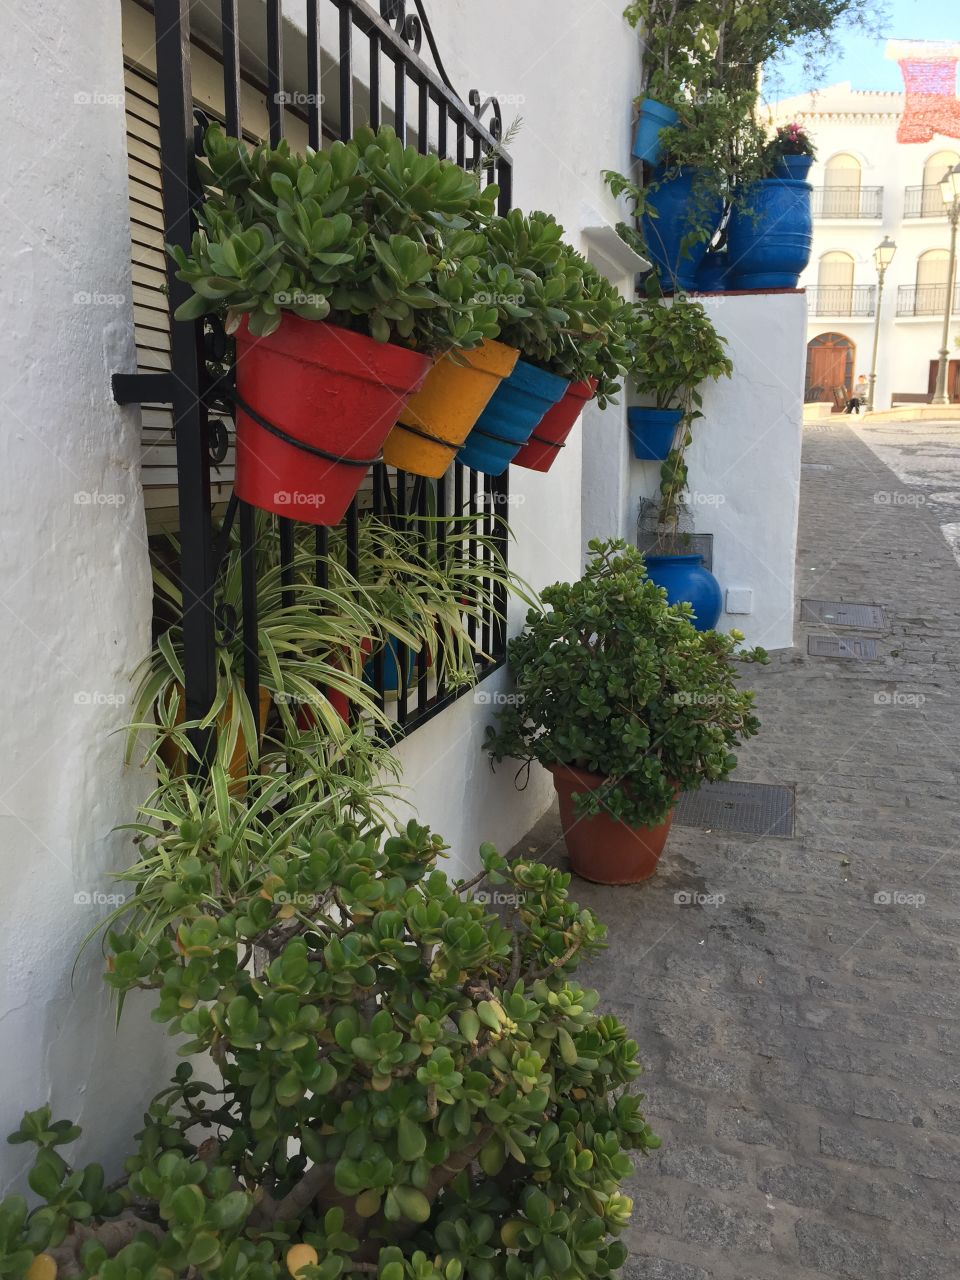 Flowerpot on house in Andalusia spain